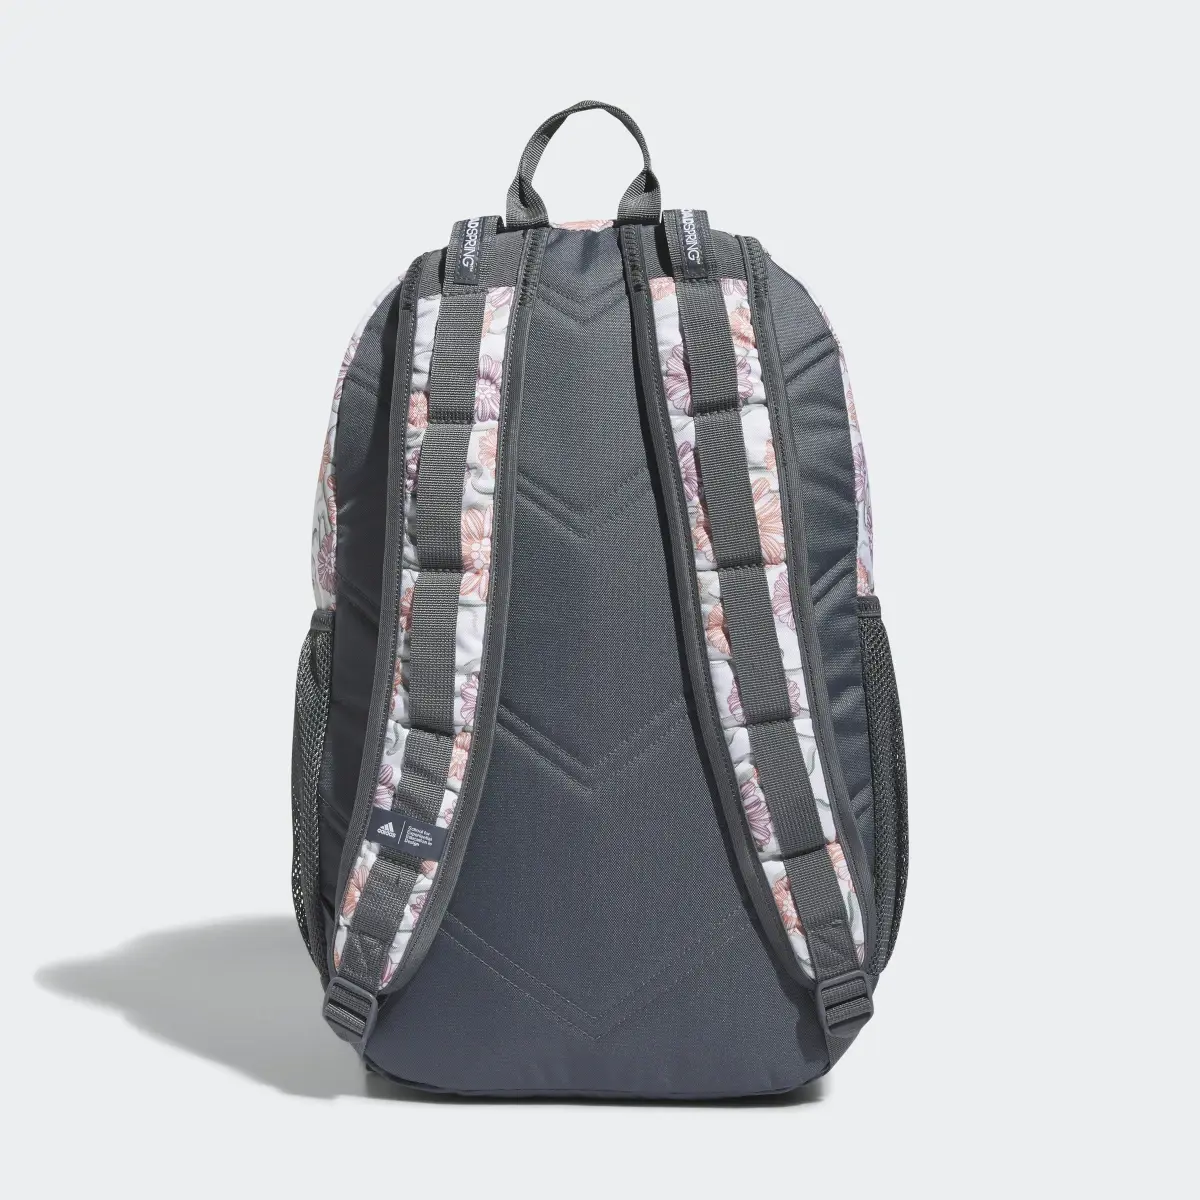 Adidas Excel Backpack. 3